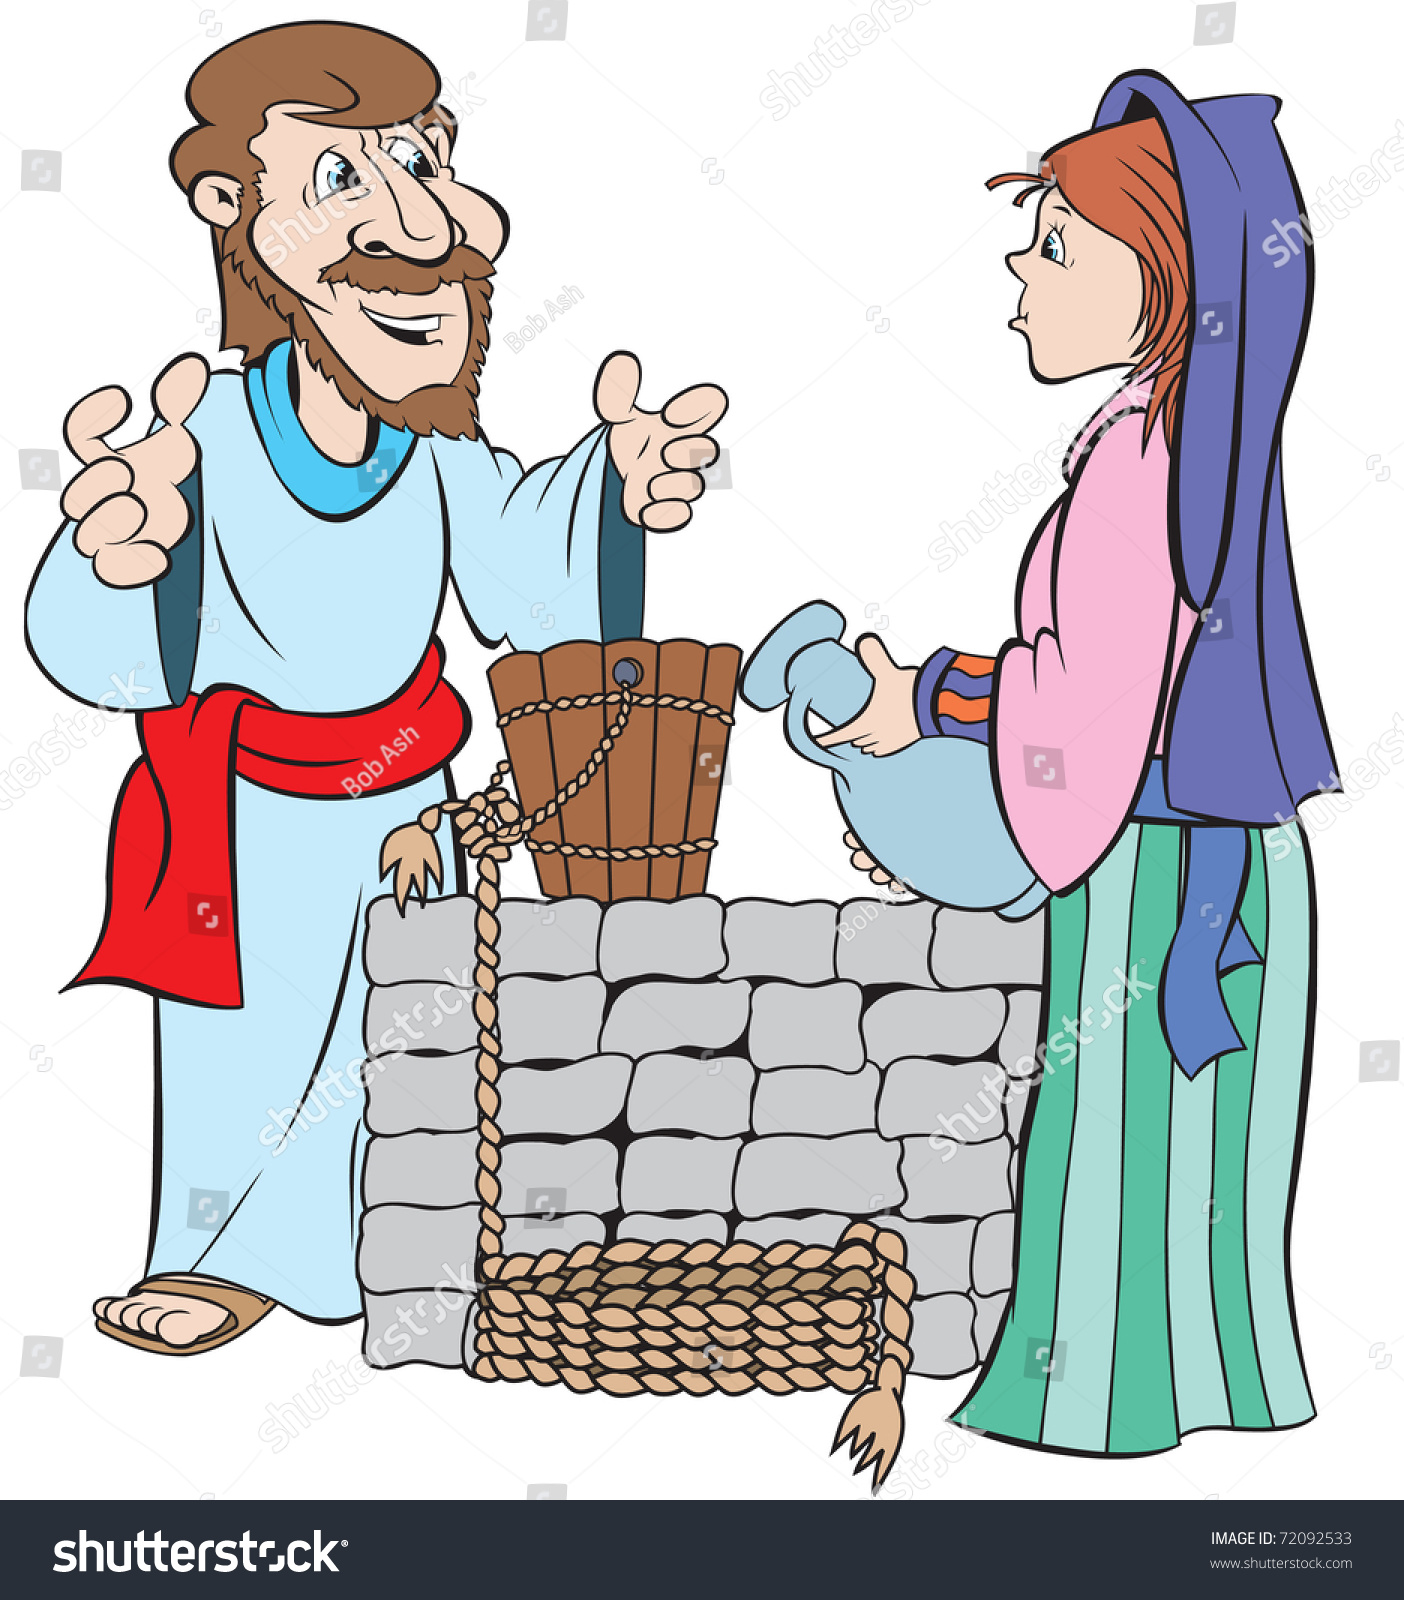 clipart jesus and the woman at the well - photo #20